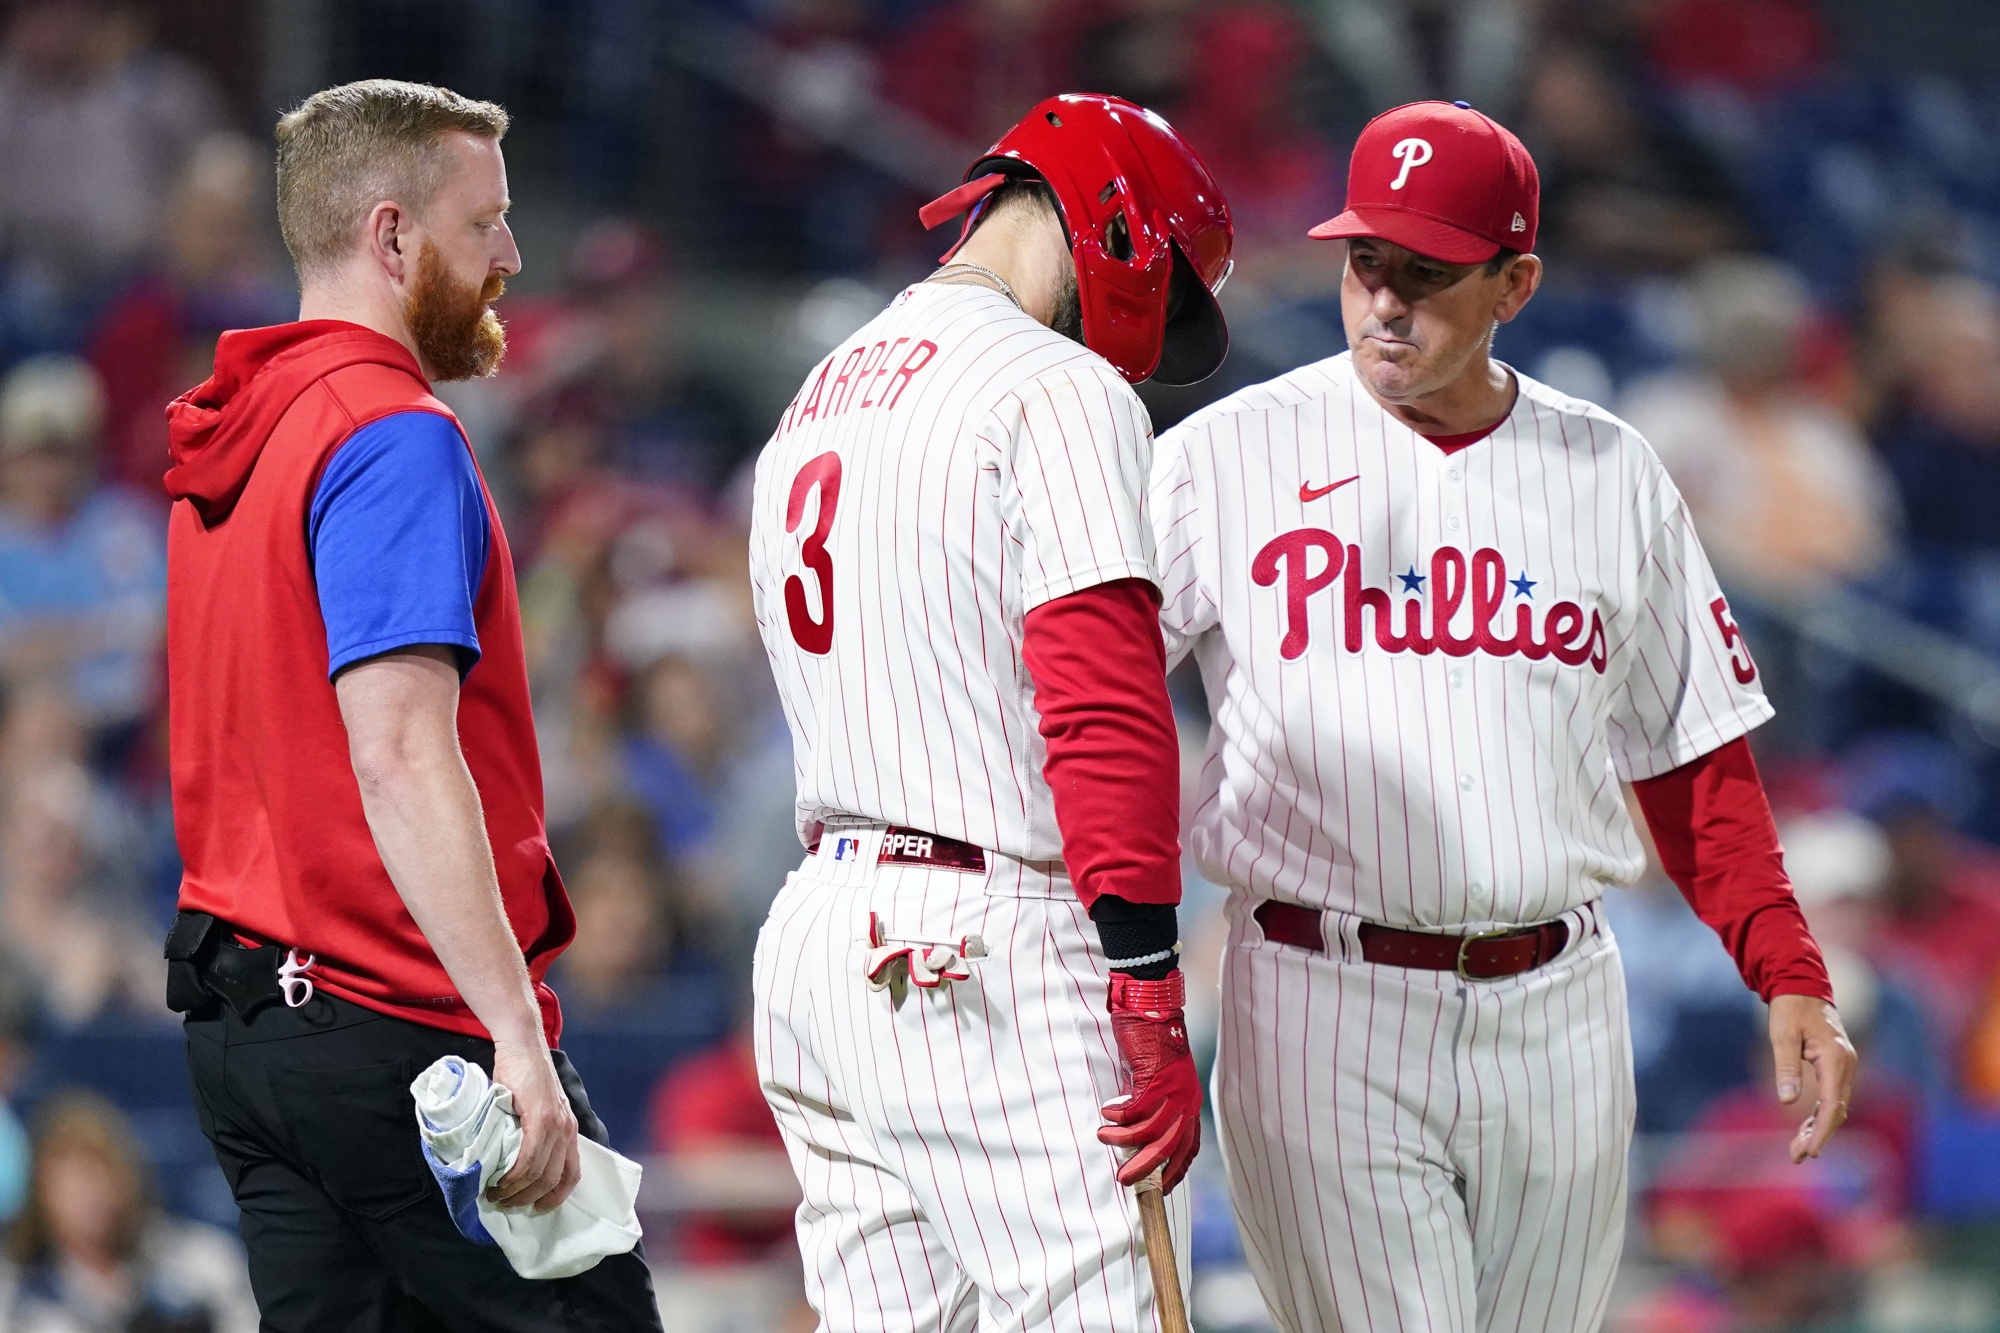 Phillies waste JT Realmuto's game-tying home run in another loss to Giants